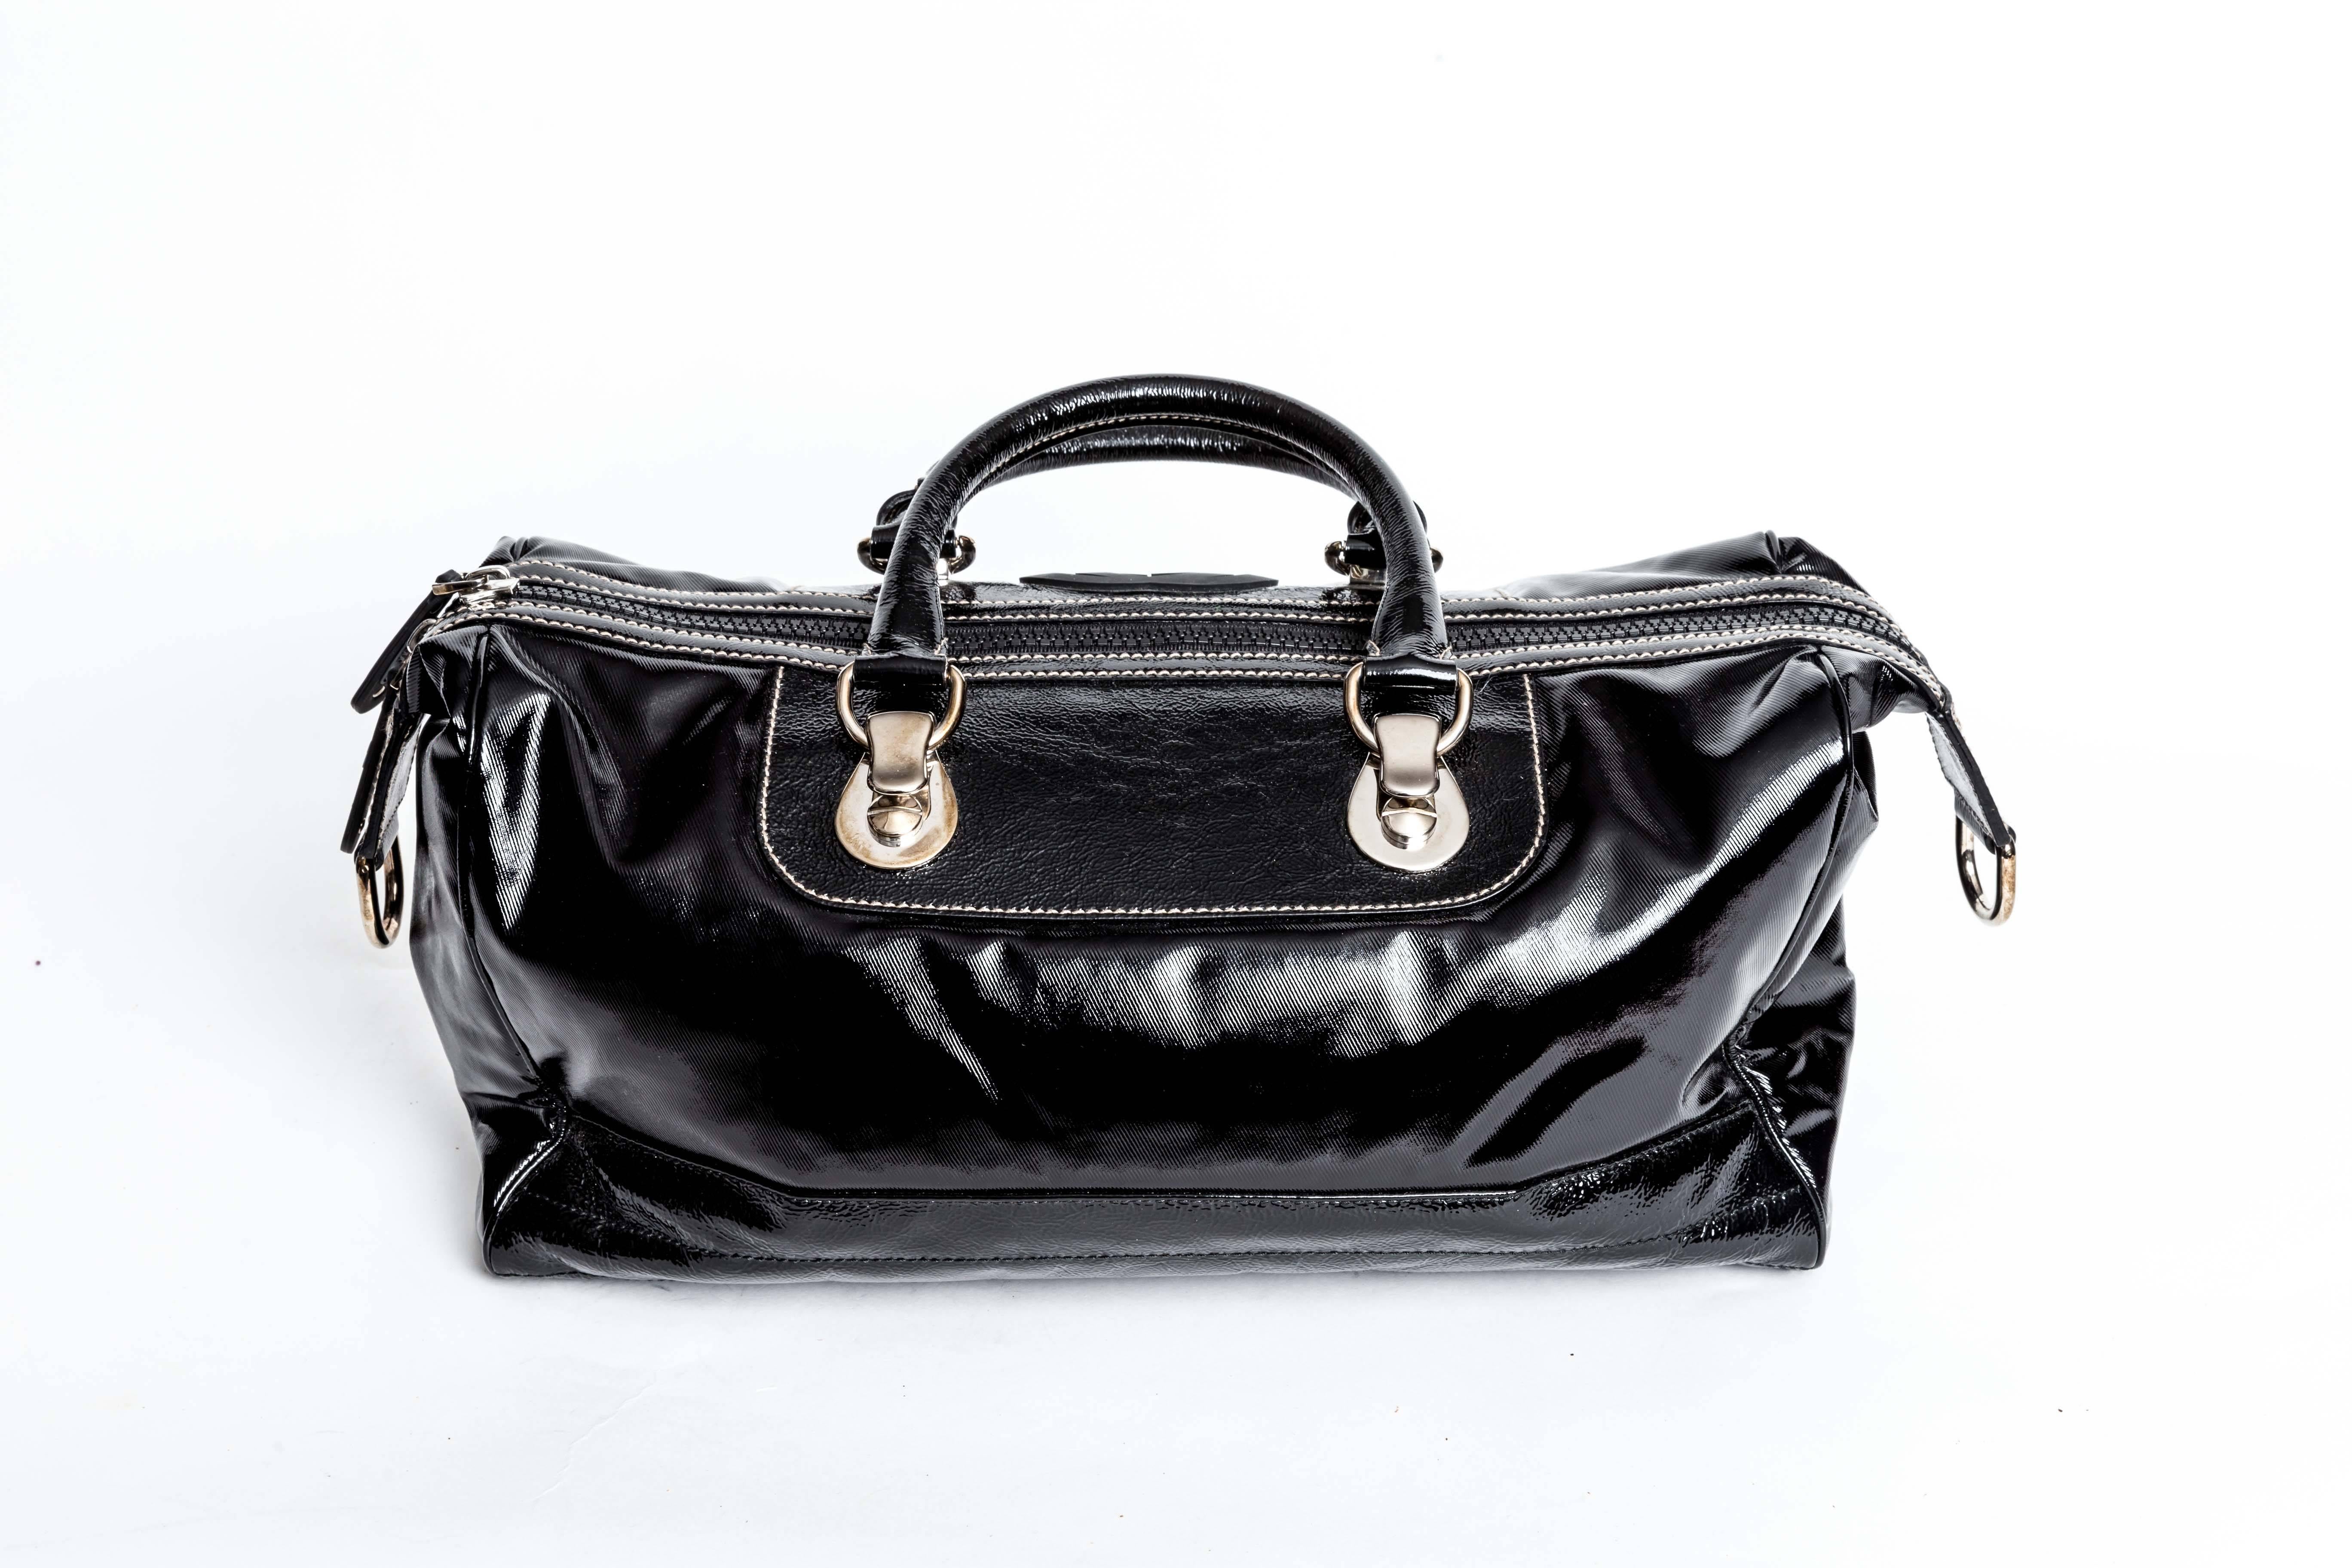 Black Gucci Snow Glam Limited Edition Leather Satchel